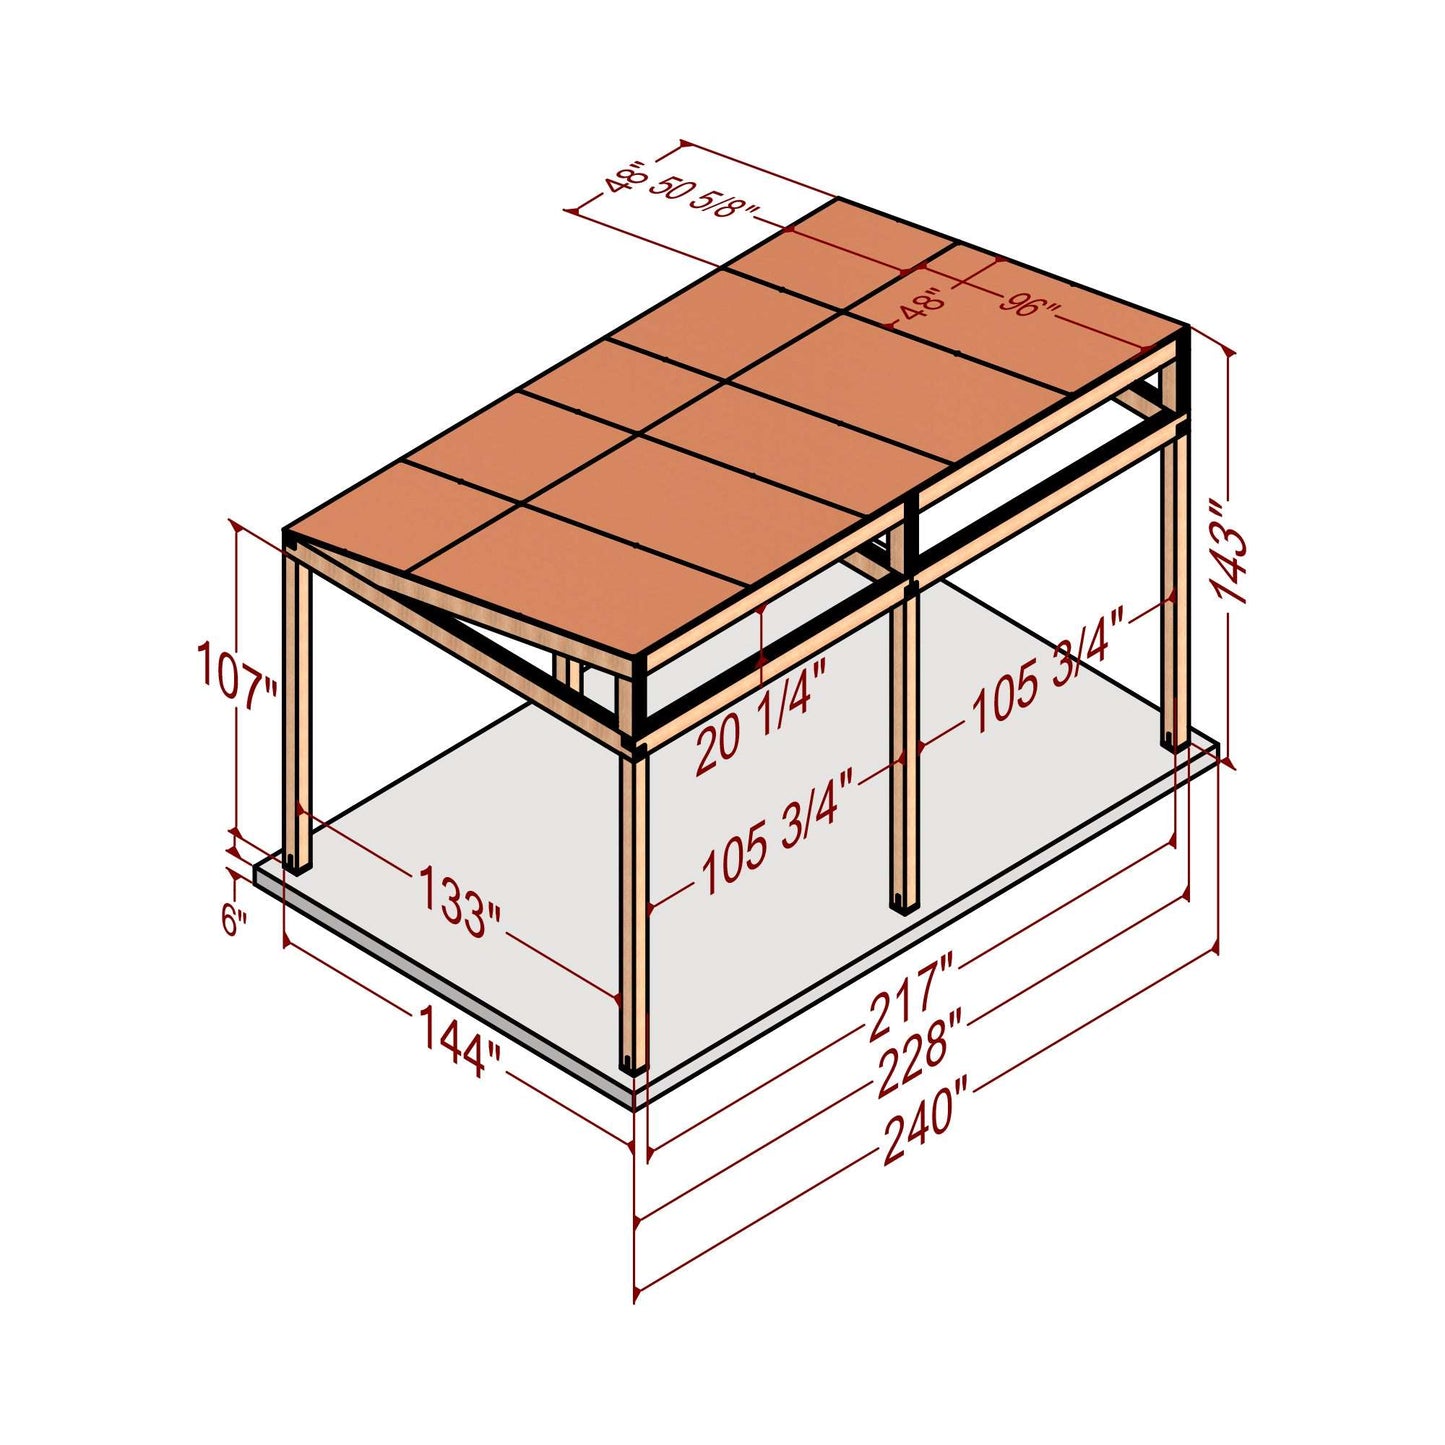 Ultimate Woodworking Plans: Build a Stylish Cover for Your Hot Tub/Swim Spa